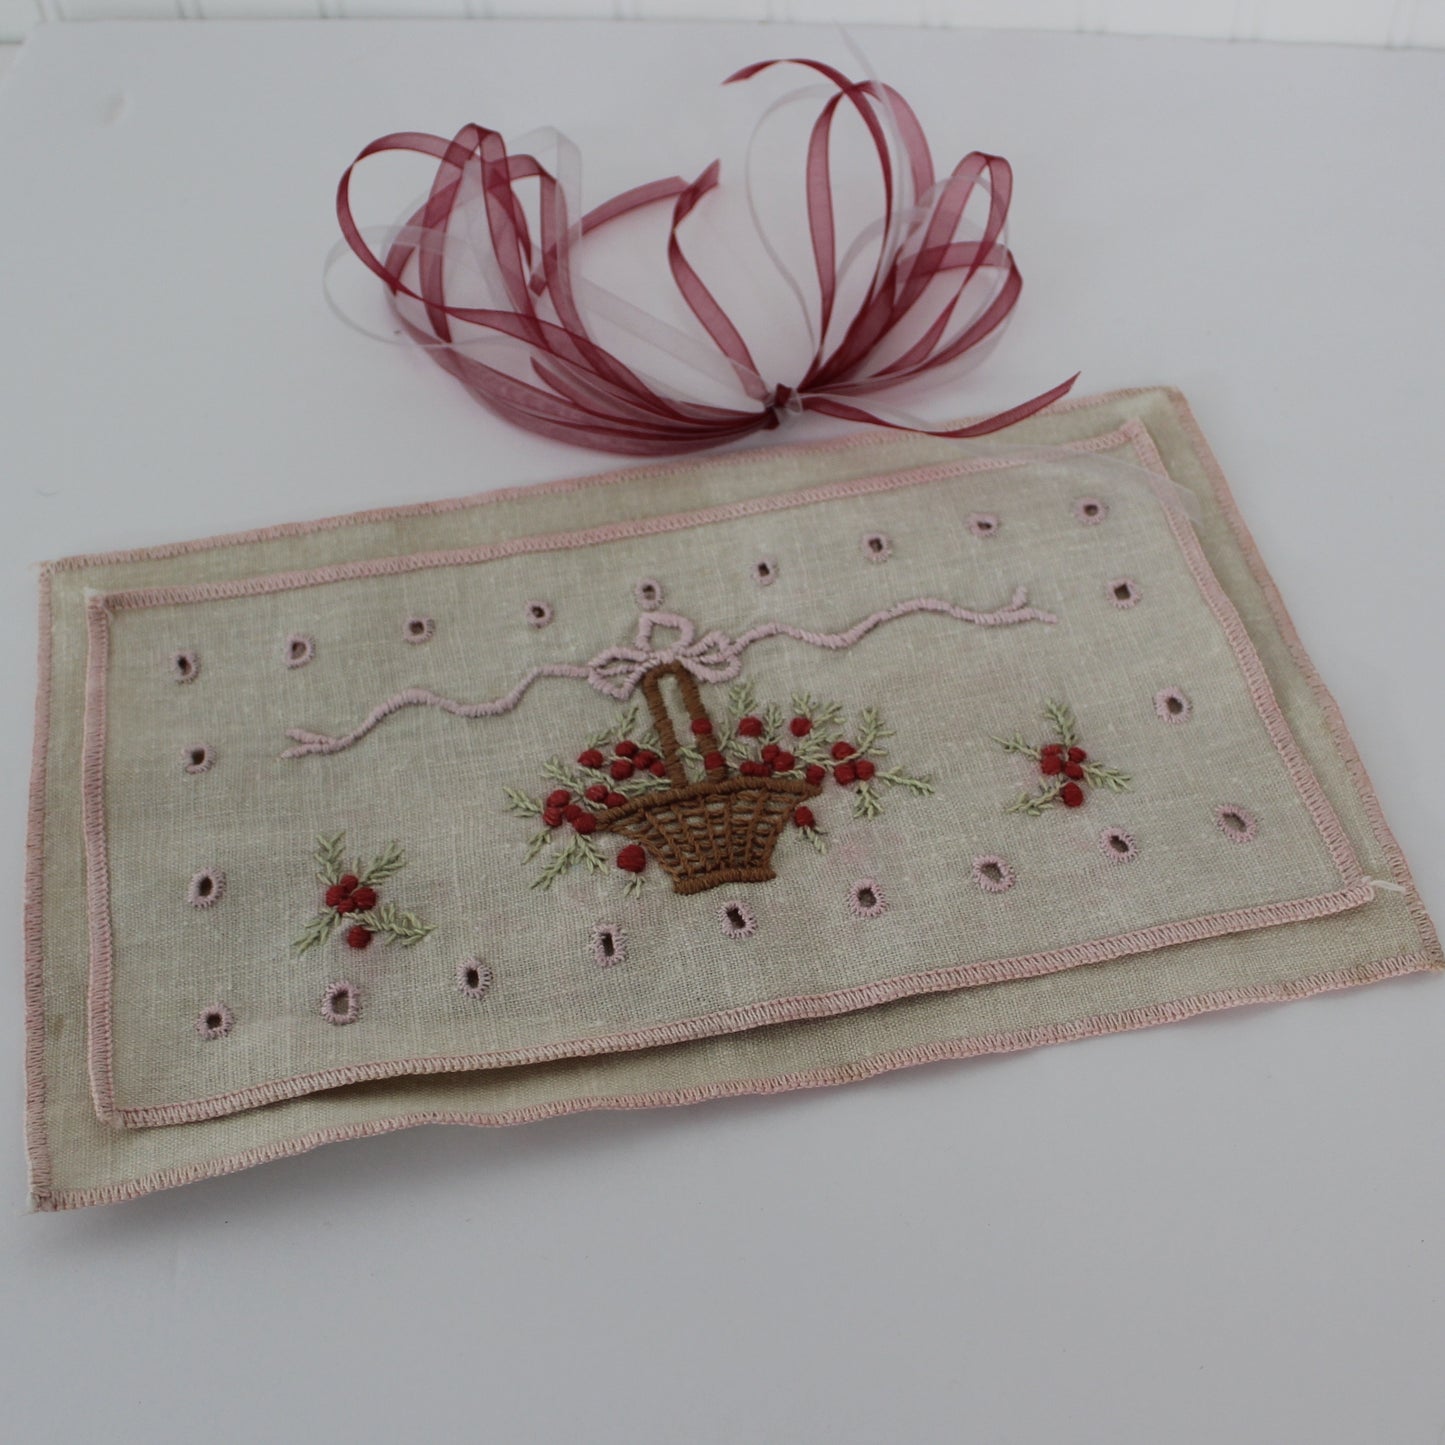 Small Intricately Embroidered Pillow Case Pin Cushion Sachet top bottom and ribbon